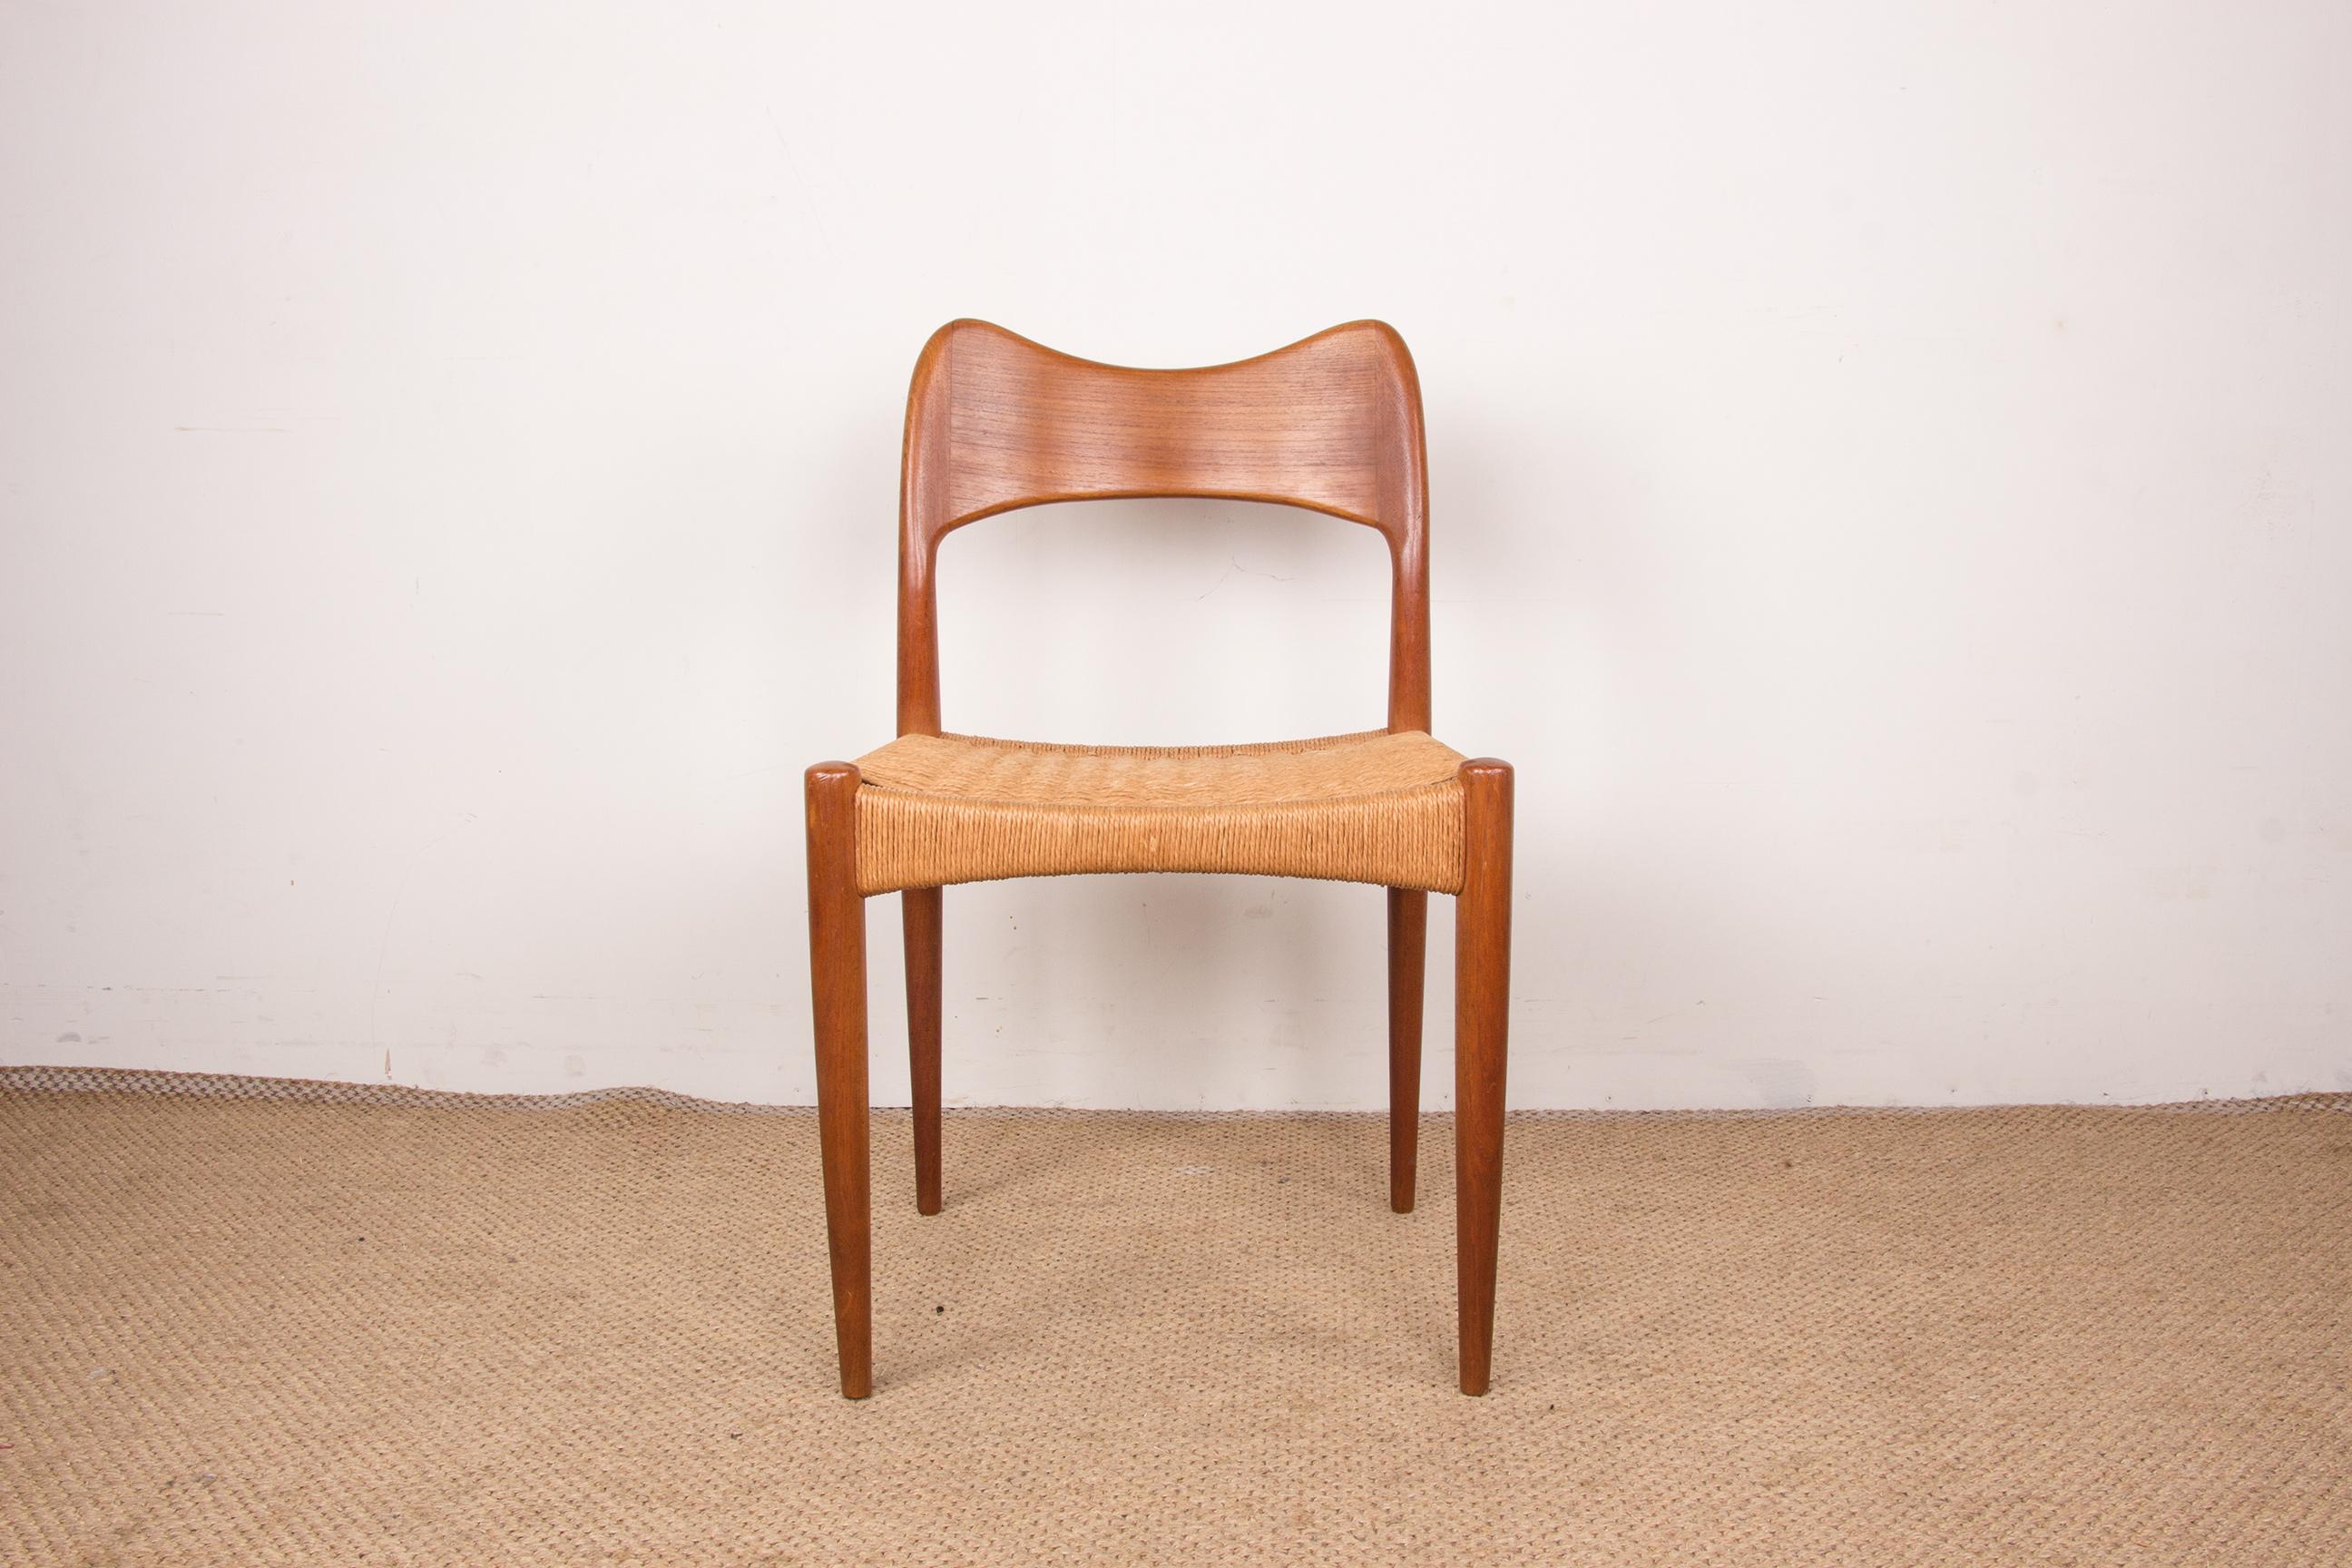 Pretty Scandinavian chairs. Sober and elegant design. Great comfort for this classic chair from this Designer.